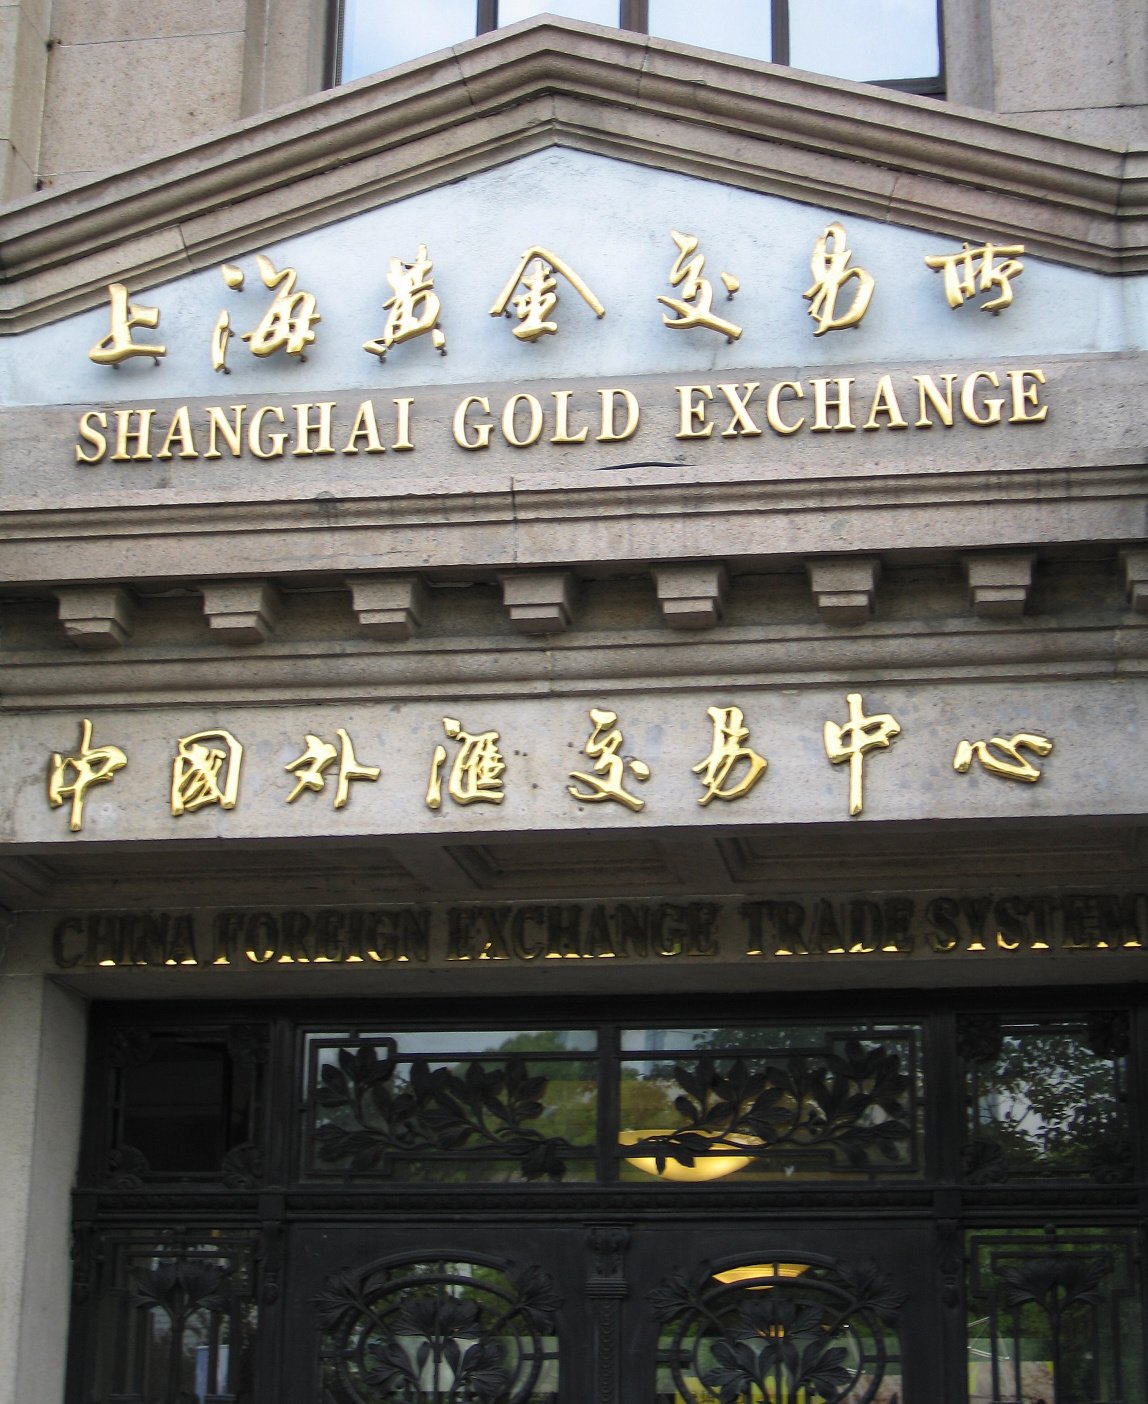 All buying and selling of spot bullion in China has to happen through the Shanghai Gold Exchange. Photo: Mark Footer